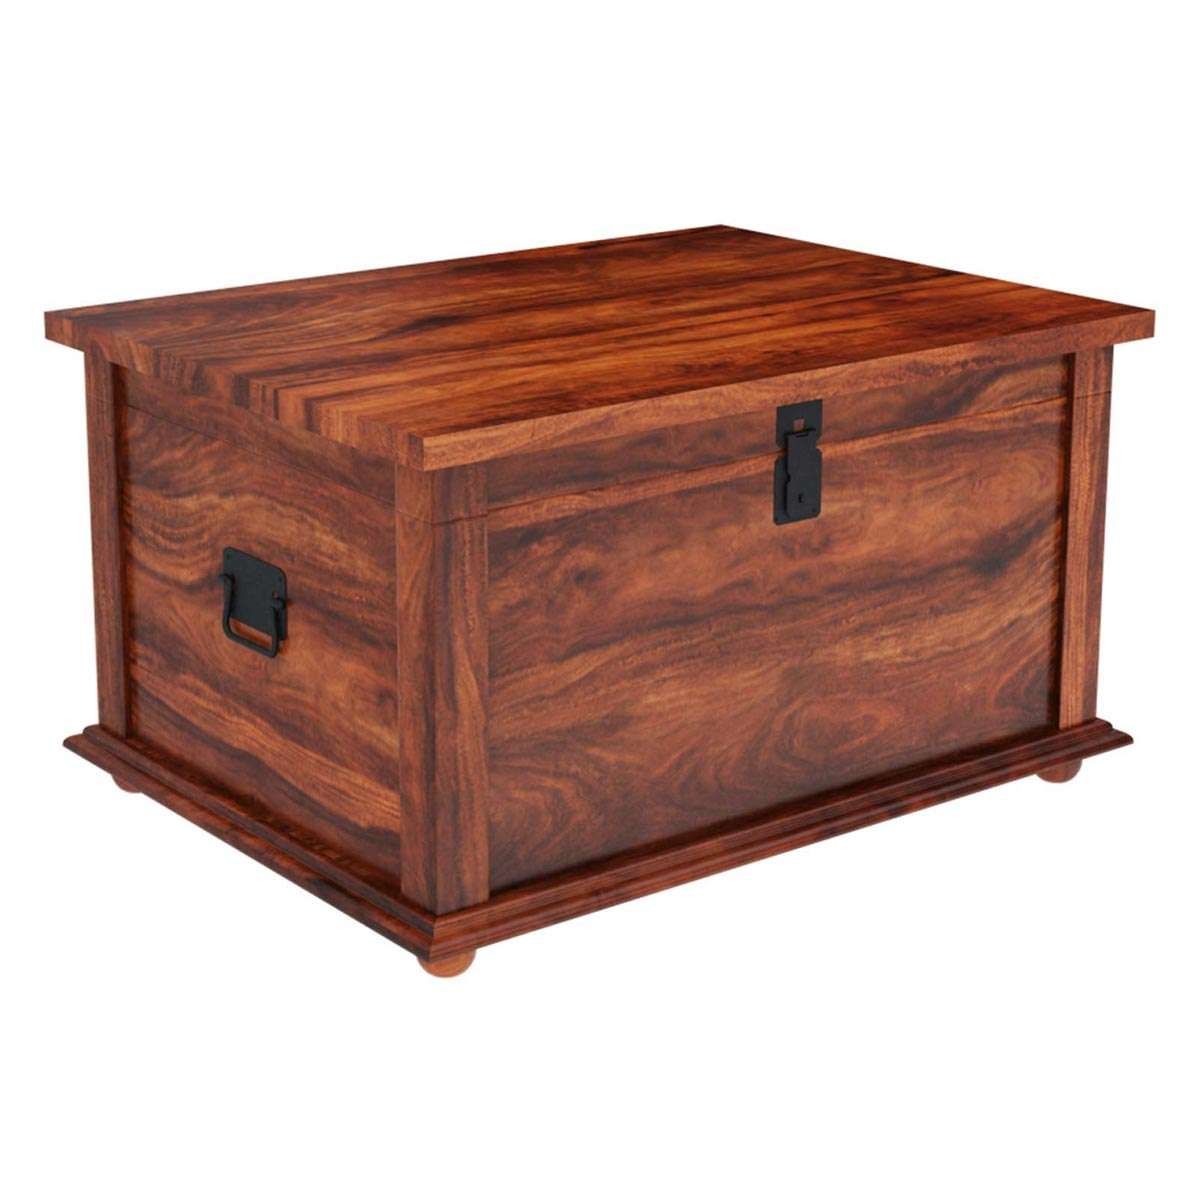 Wood Storage Grinnell Storage Chest Trunk Coffee Table With Regard To Best And Newest Wooden Storage Coffee Tables (View 3 of 20)